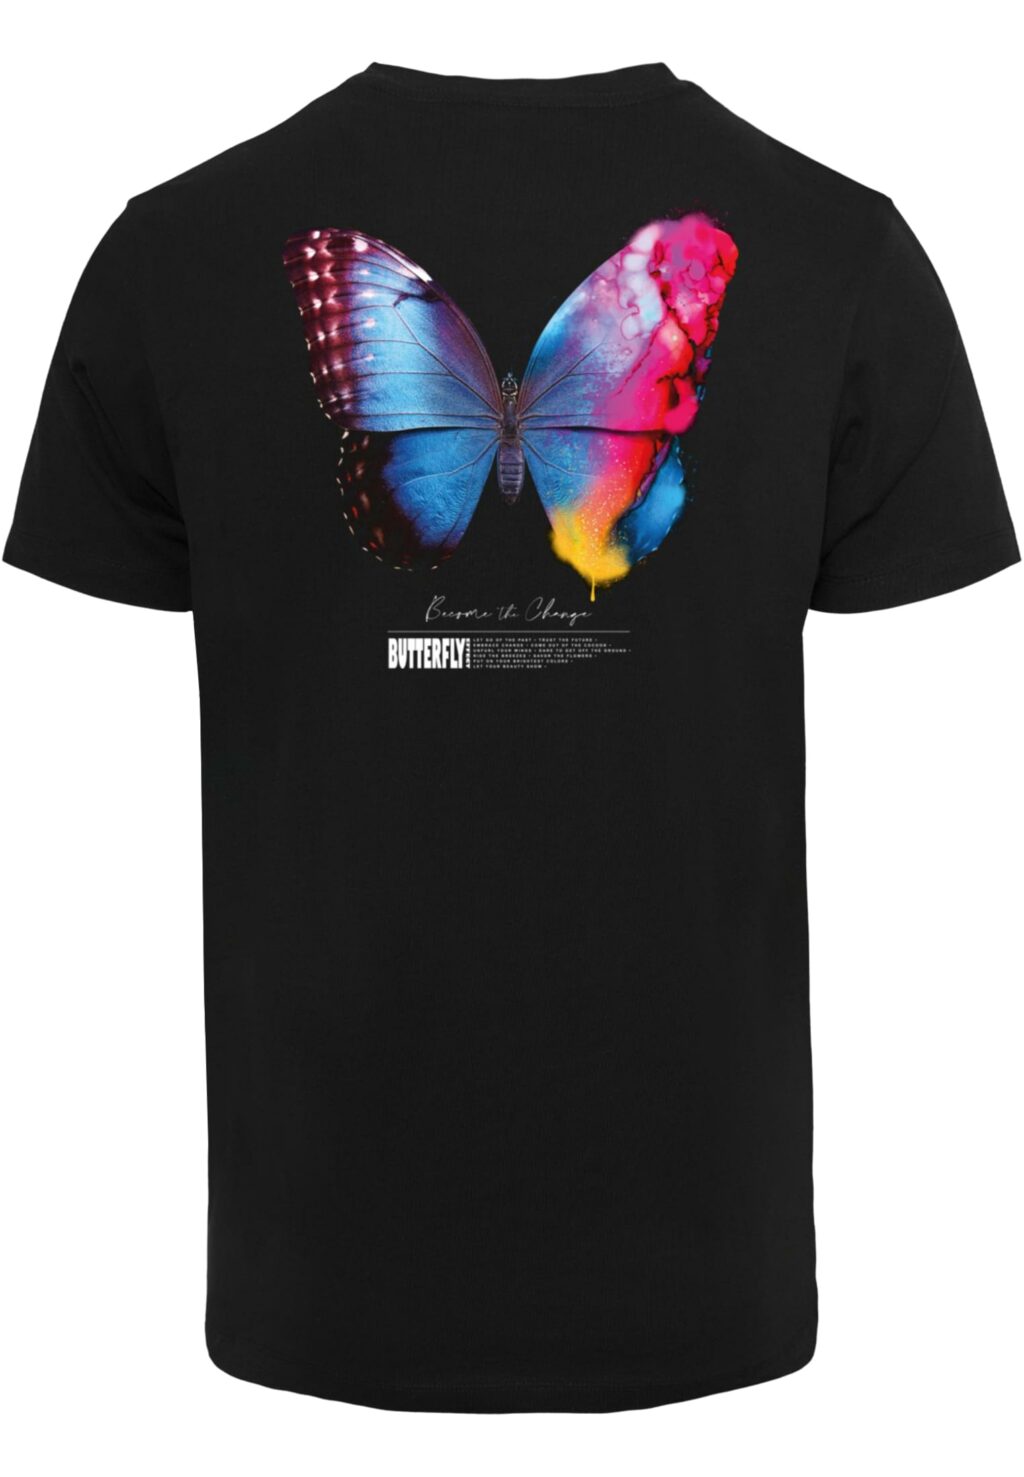 Become the Change Butterfly 2.0 Tee black MT3026